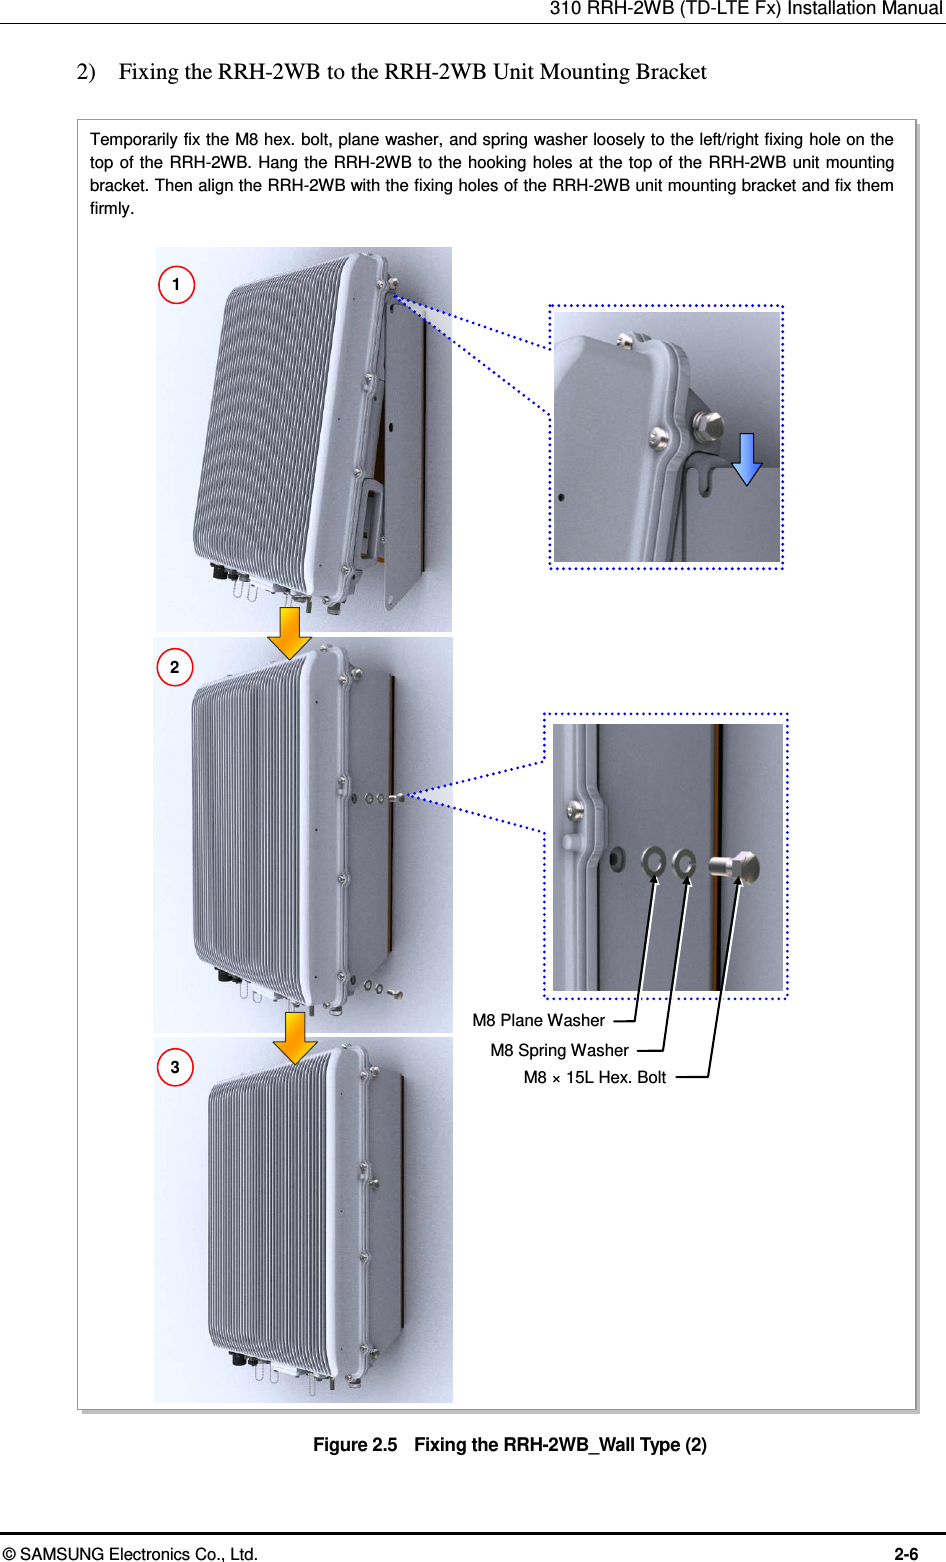 310 RRH-2WB (TD-LTE Fx) Installation Manual  © SAMSUNG Electronics Co., Ltd.  2-6 2)    Fixing the RRH-2WB to the RRH-2WB Unit Mounting Bracket  Figure 2.5    Fixing the RRH-2WB_Wall Type (2)   1 2 M8 × 15L Hex. Bolt M8 Spring Washer M8 Plane Washer 3  Temporarily fix the M8 hex. bolt, plane washer, and spring washer loosely to the left/right fixing hole on the top of the  RRH-2WB. Hang the RRH-2WB to the  hooking holes at the top of the  RRH-2WB unit mounting bracket. Then align the RRH-2WB with the fixing holes of the RRH-2WB unit mounting bracket and fix them firmly. 